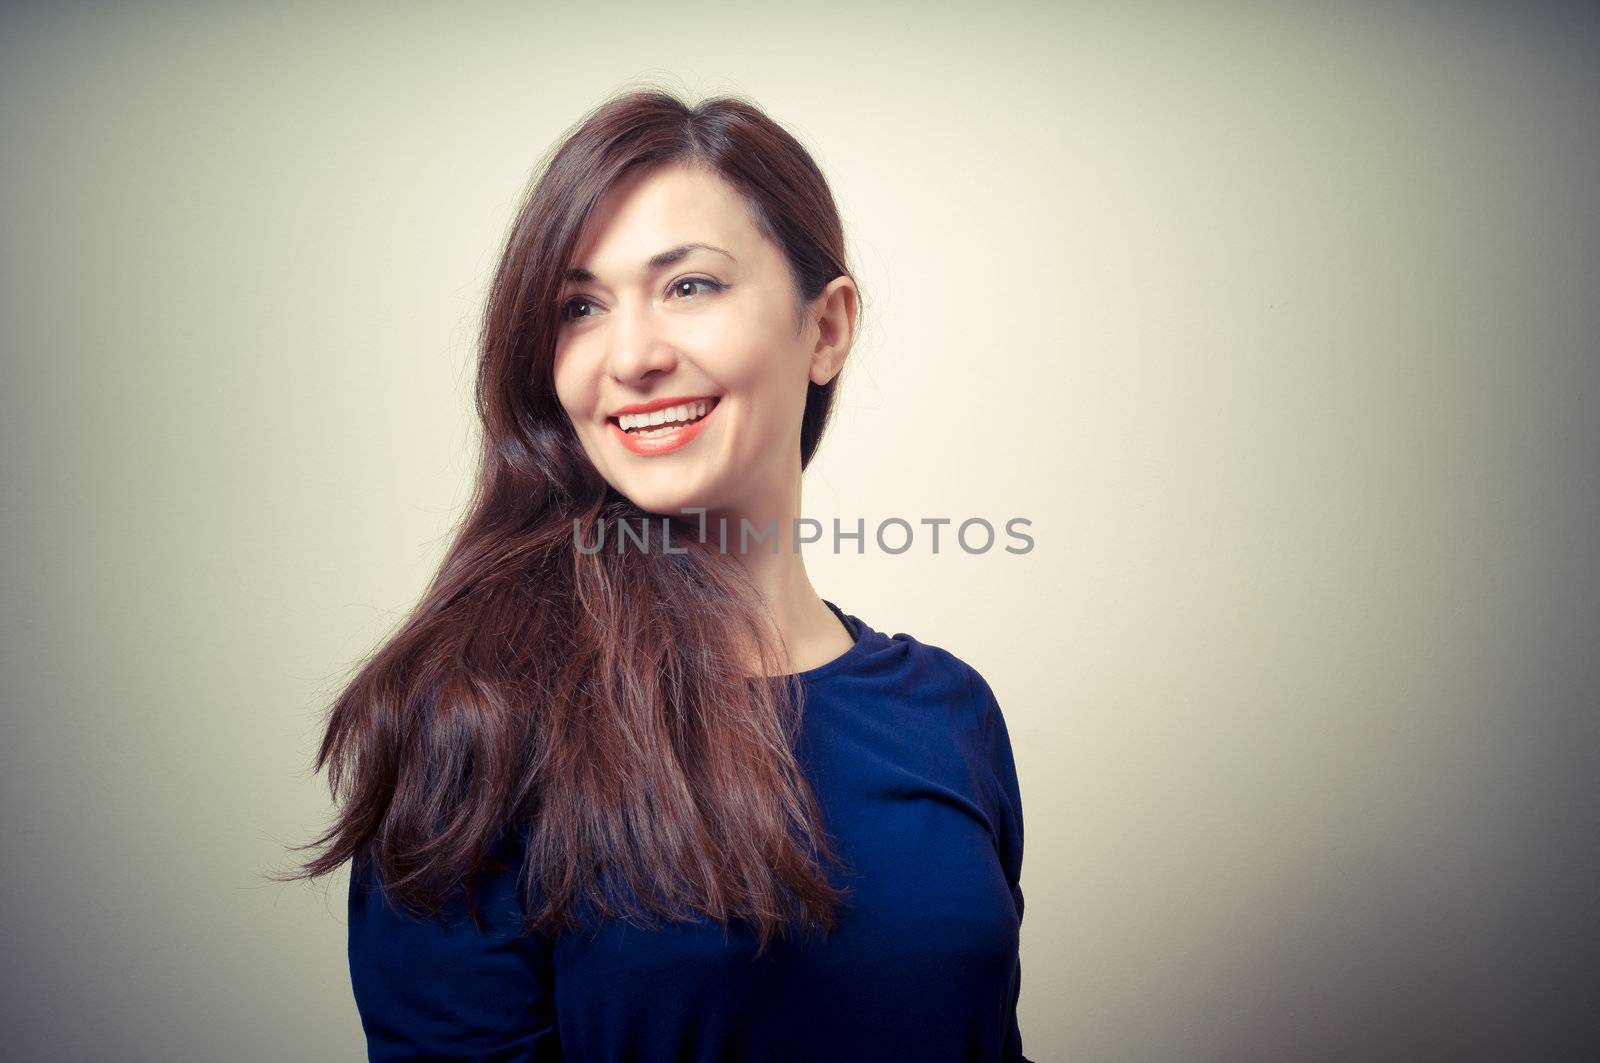 portrait of beautiful girl with long hair and blue sweater on gray background